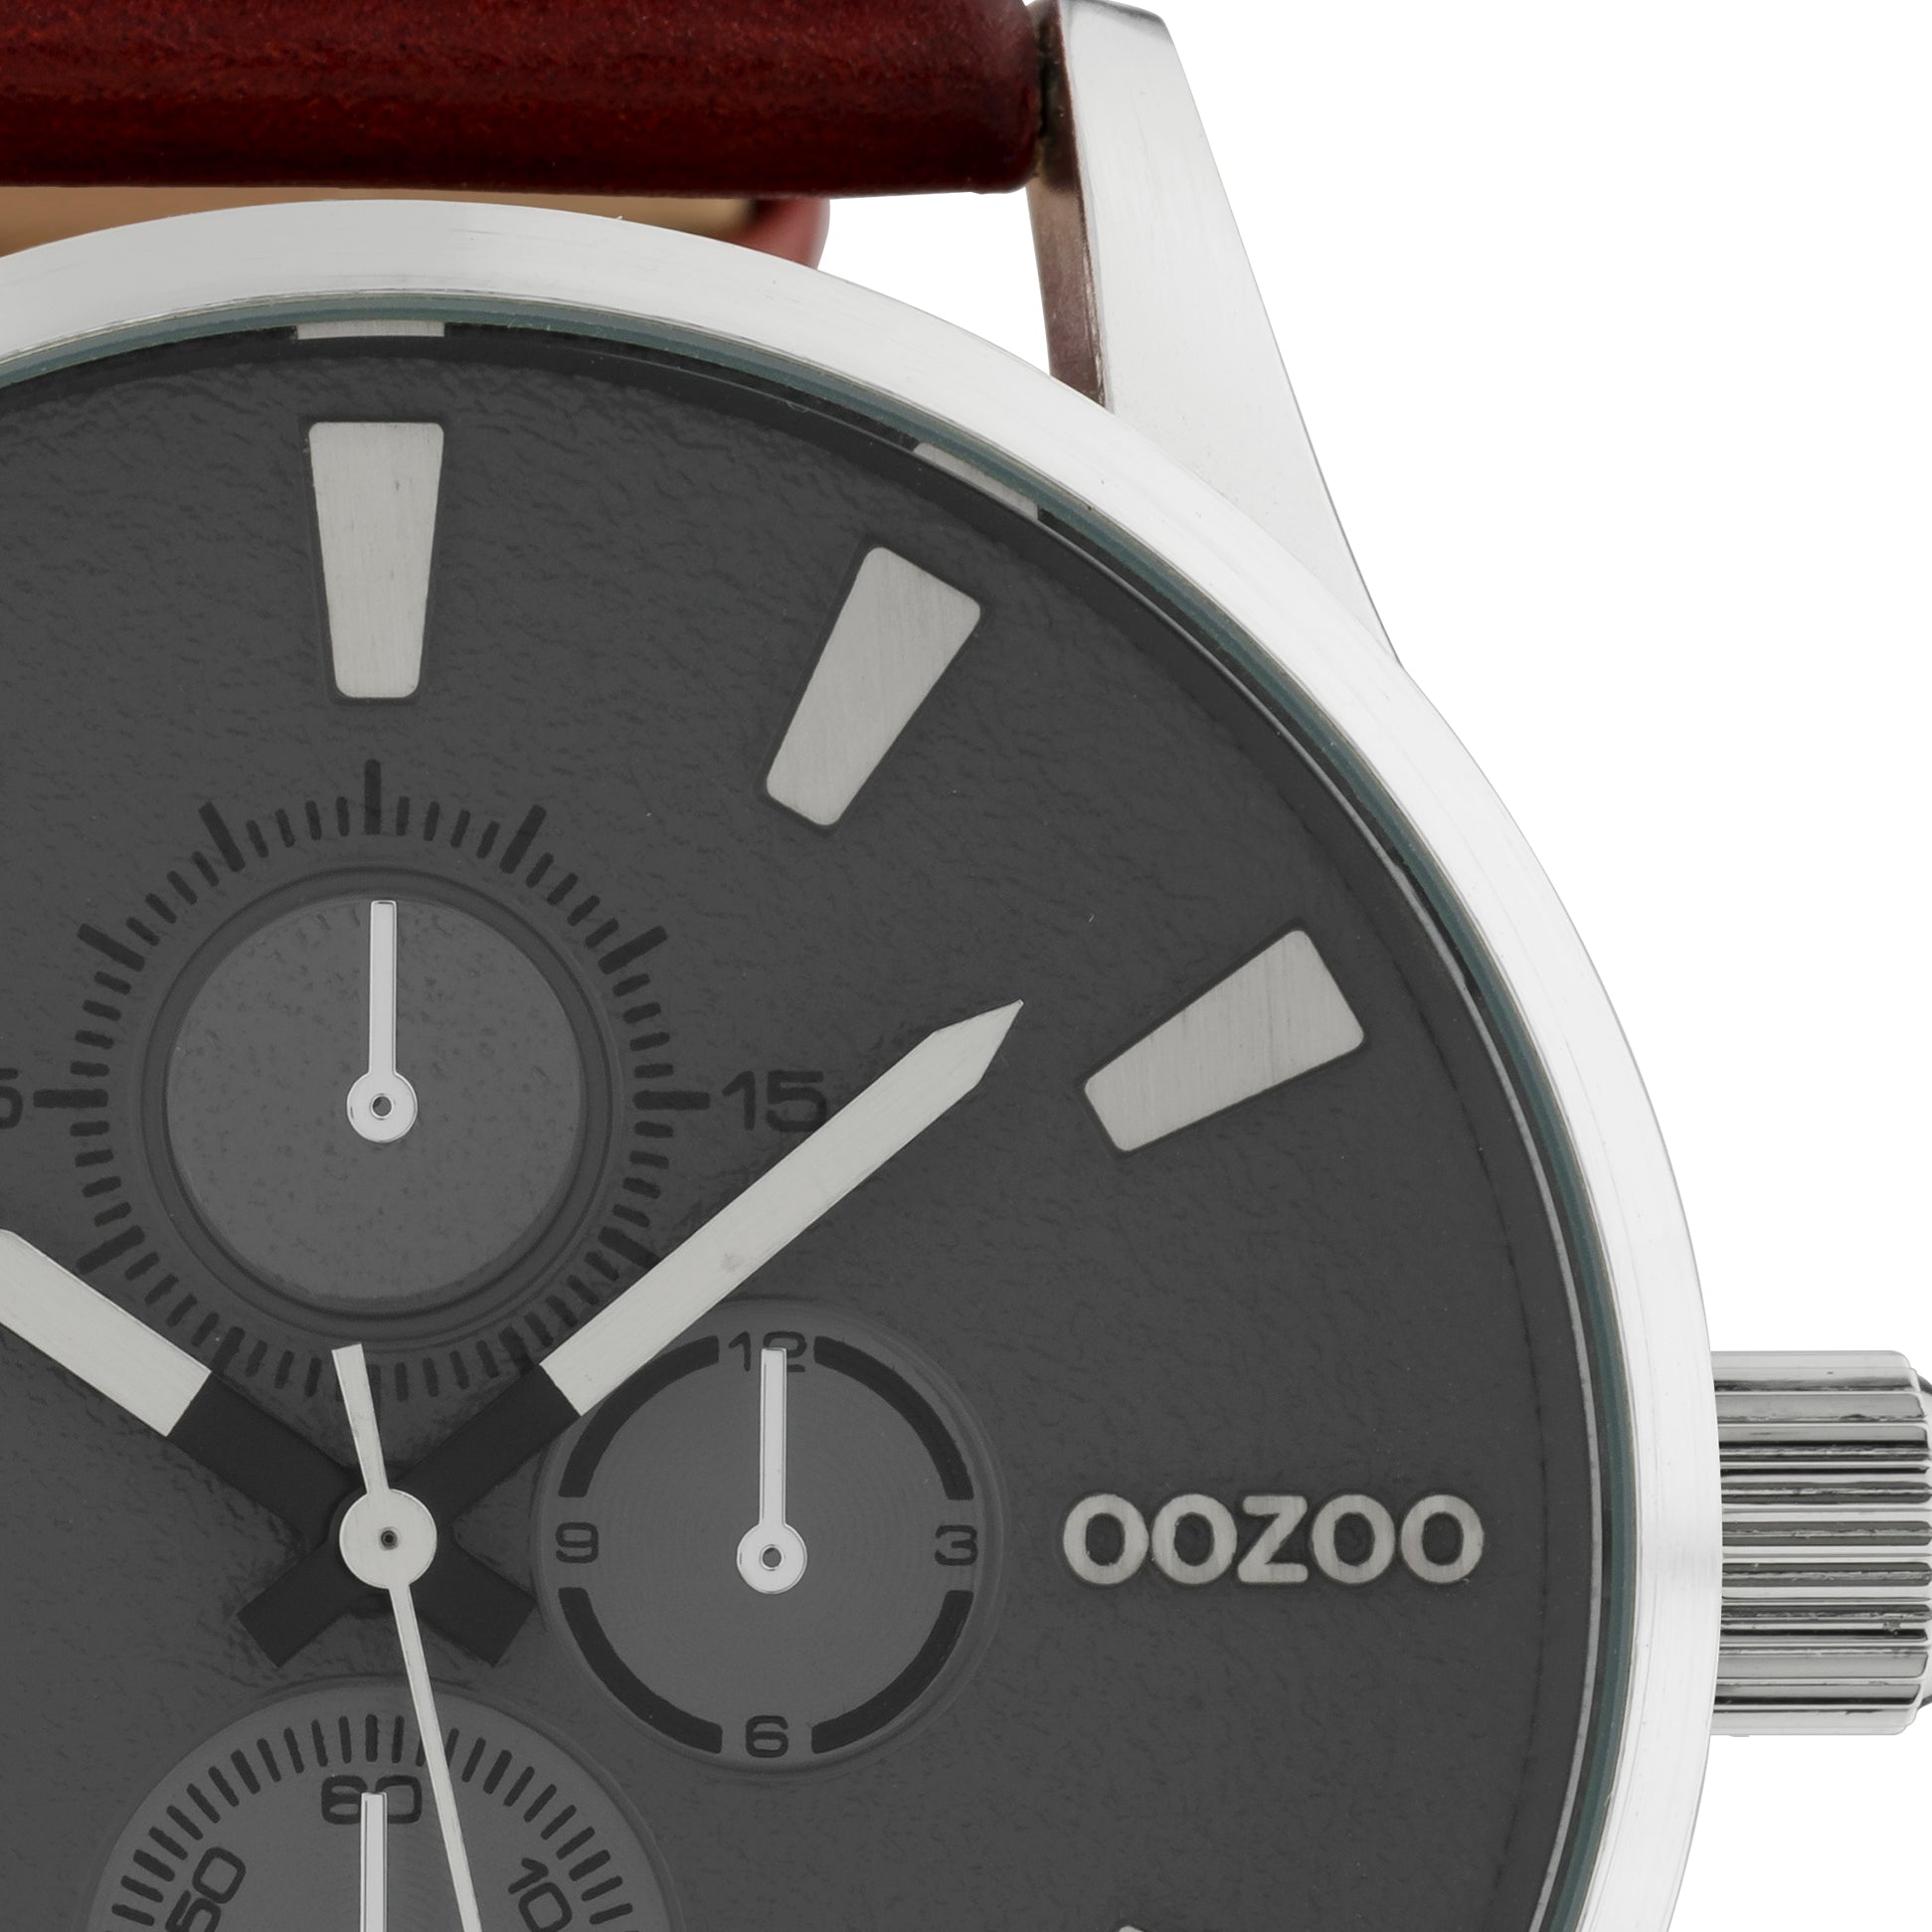 OOZOO 48m Dark Brown and Silver Leather Watch